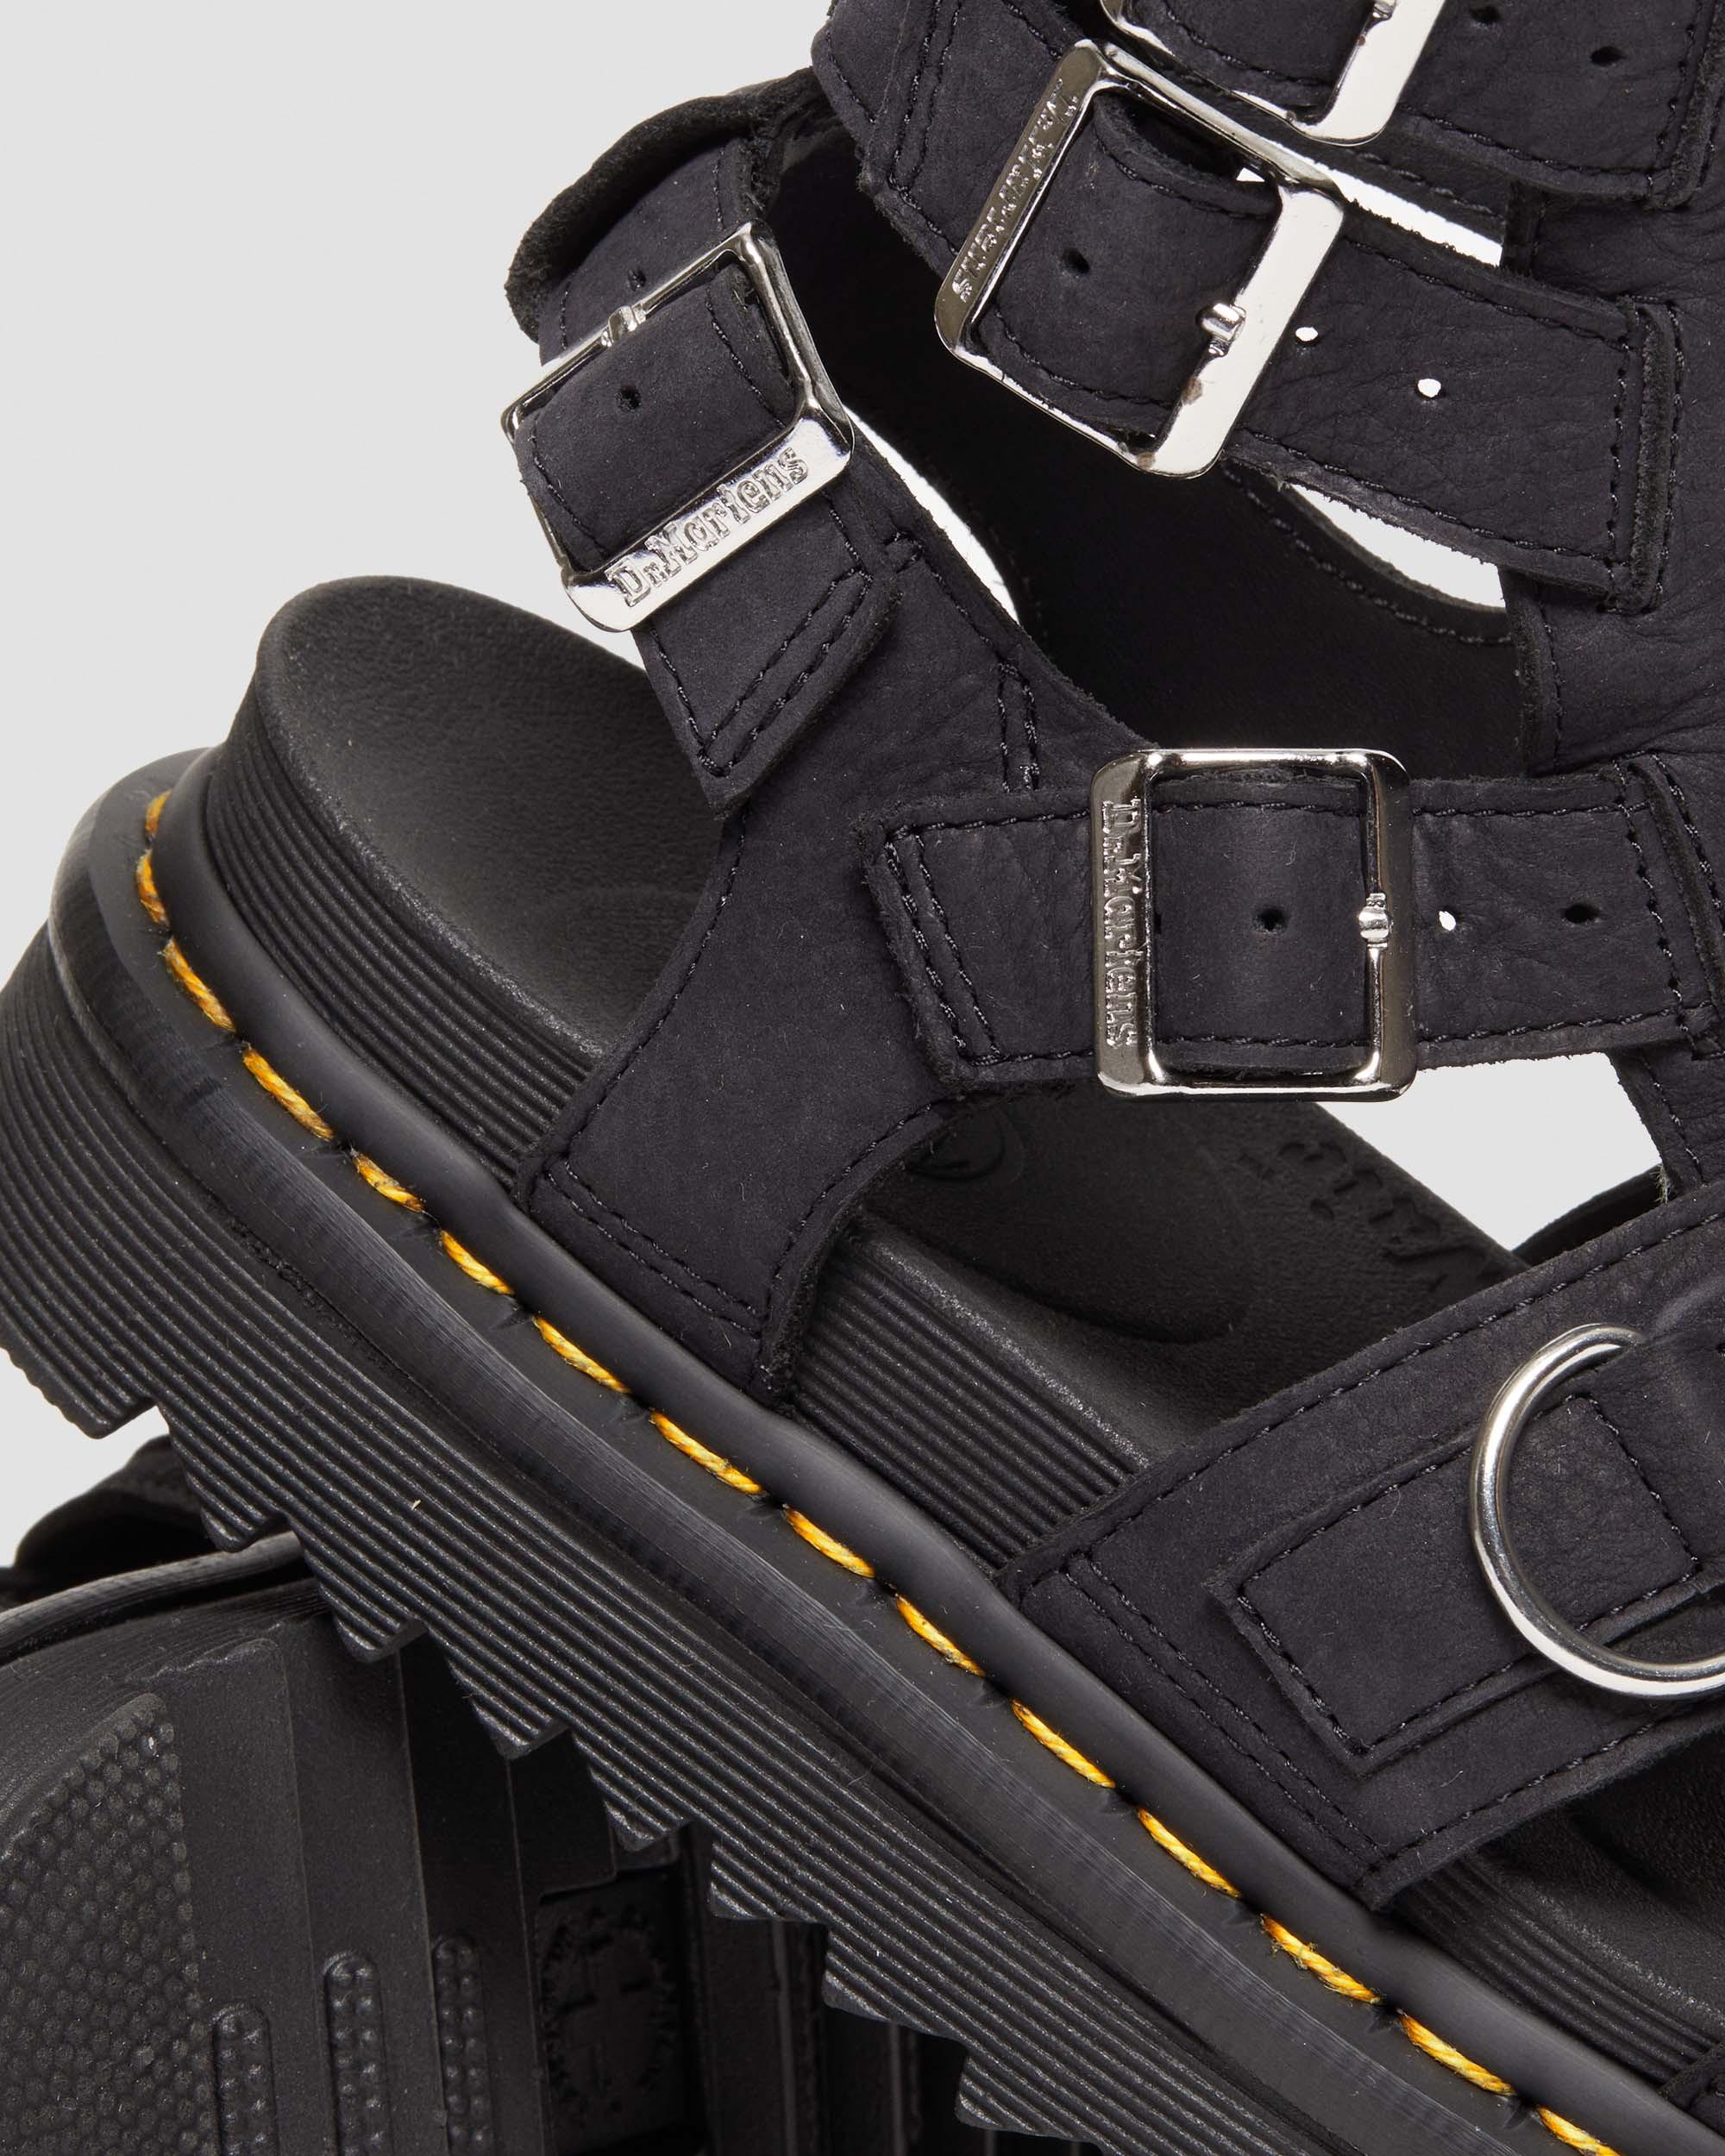 Olson Tumbled Nubuck Leather Gladiator Zip Sandals in Charcoal 